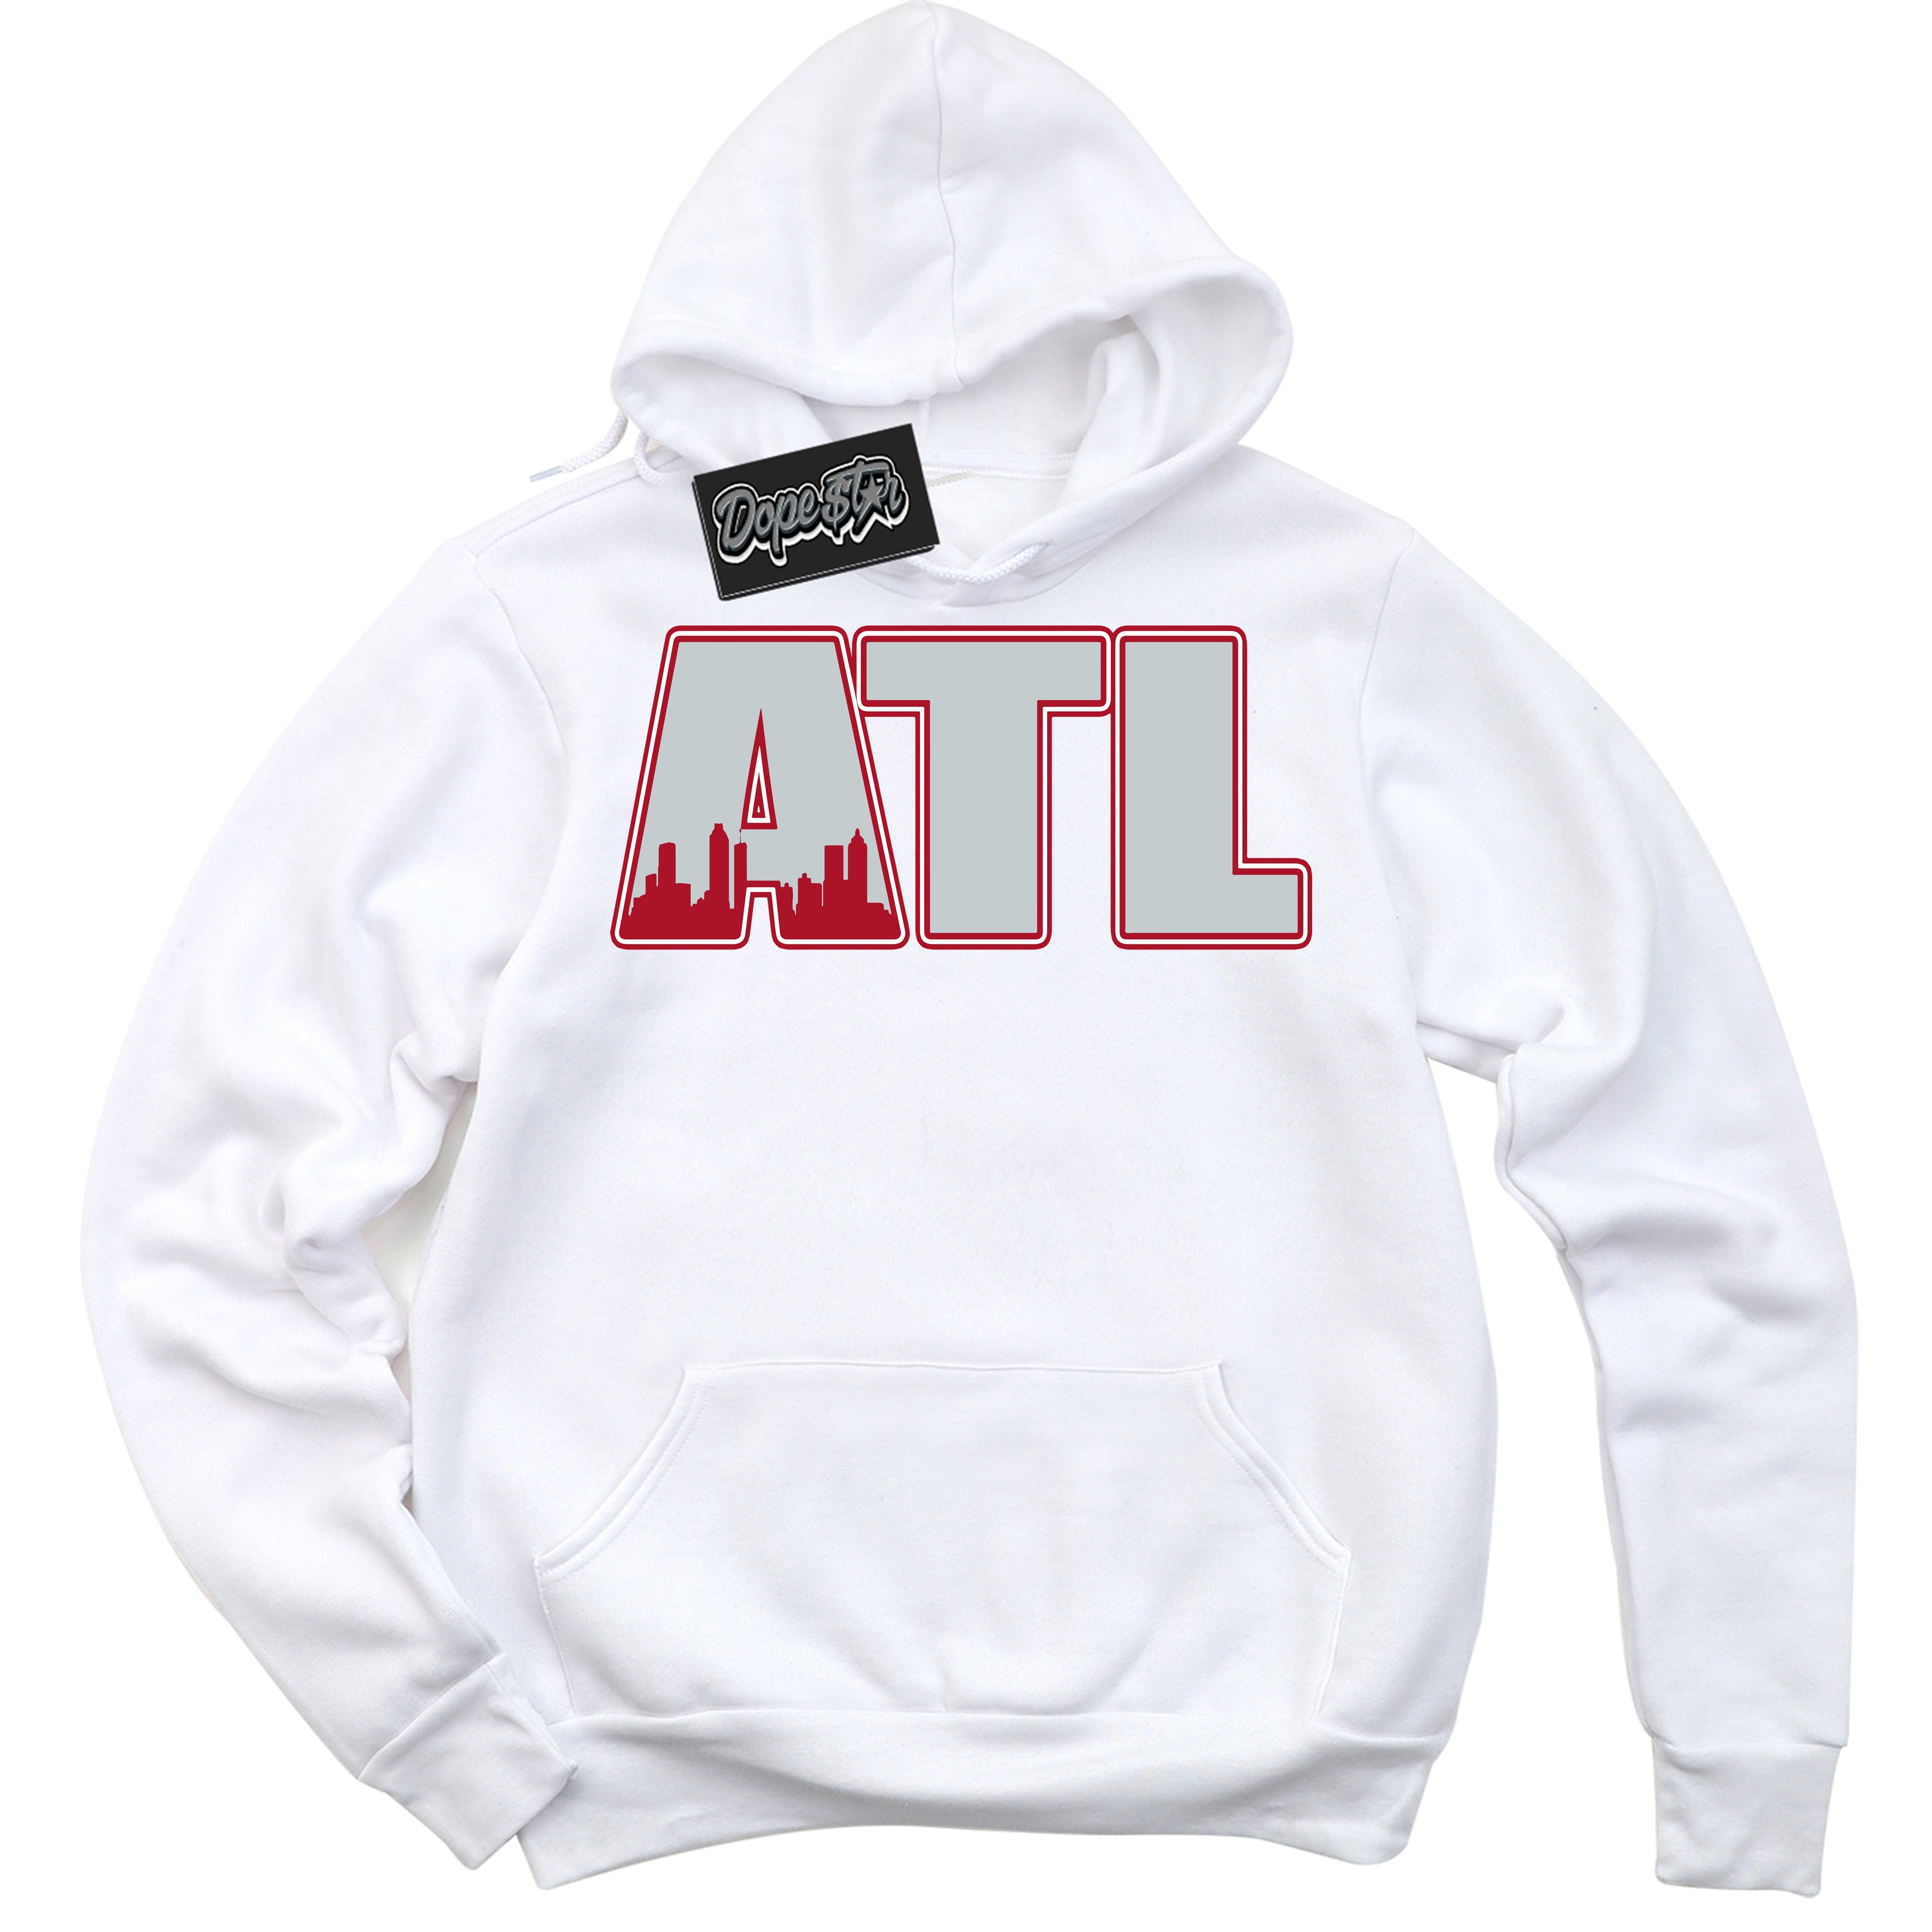 Cool Black Hoodie with “ Atlanta ”  design that Perfectly Matches  Reverse Ultraman Sneakers.